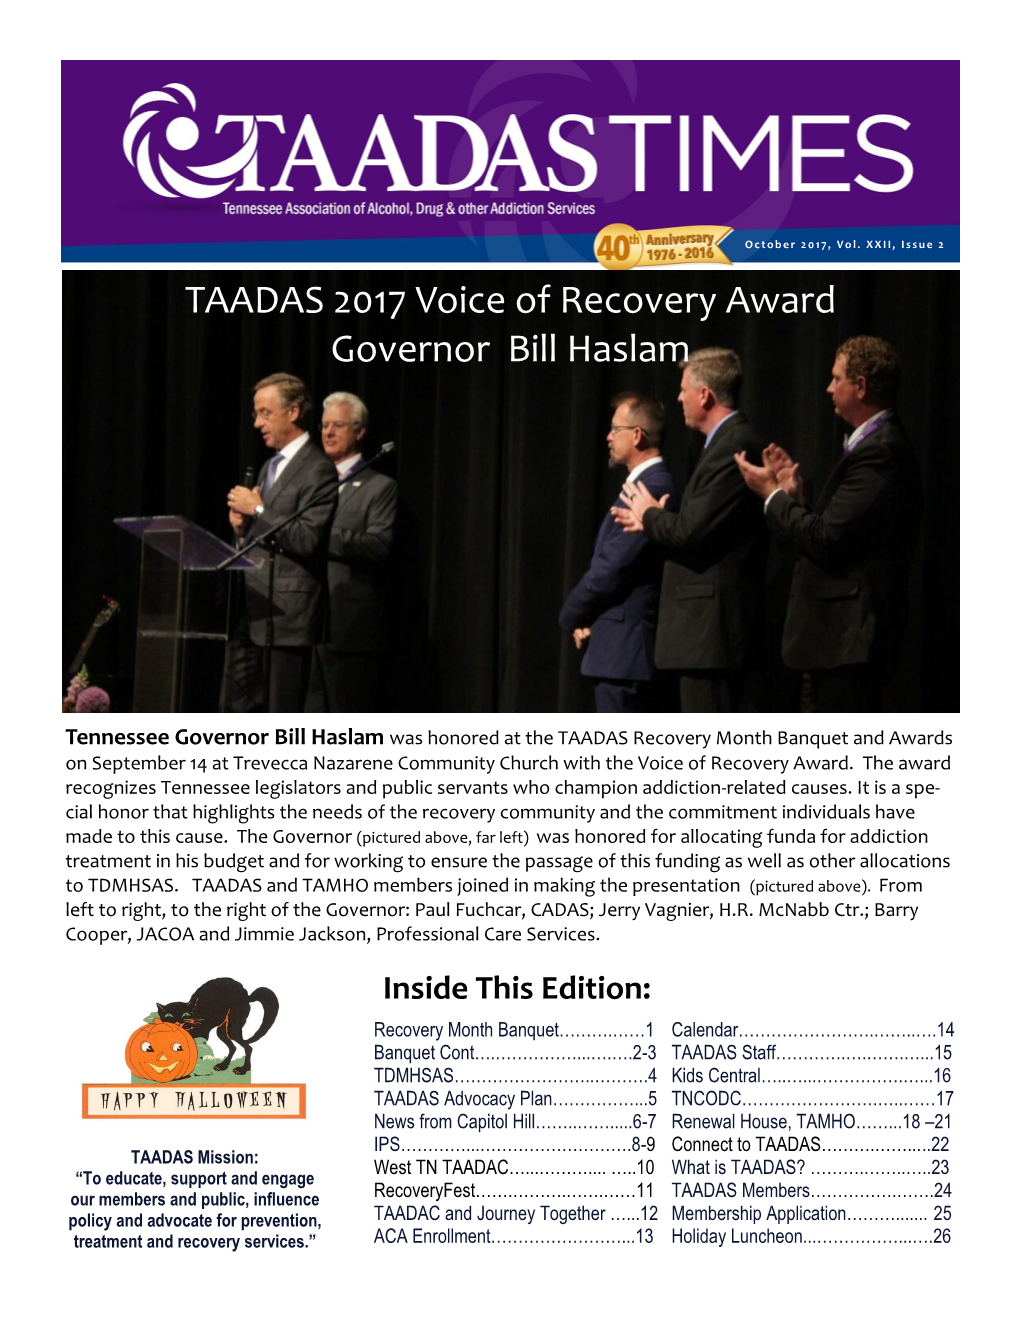 TAADAS 2017 Voice of Recovery Award Governor Bill Haslam